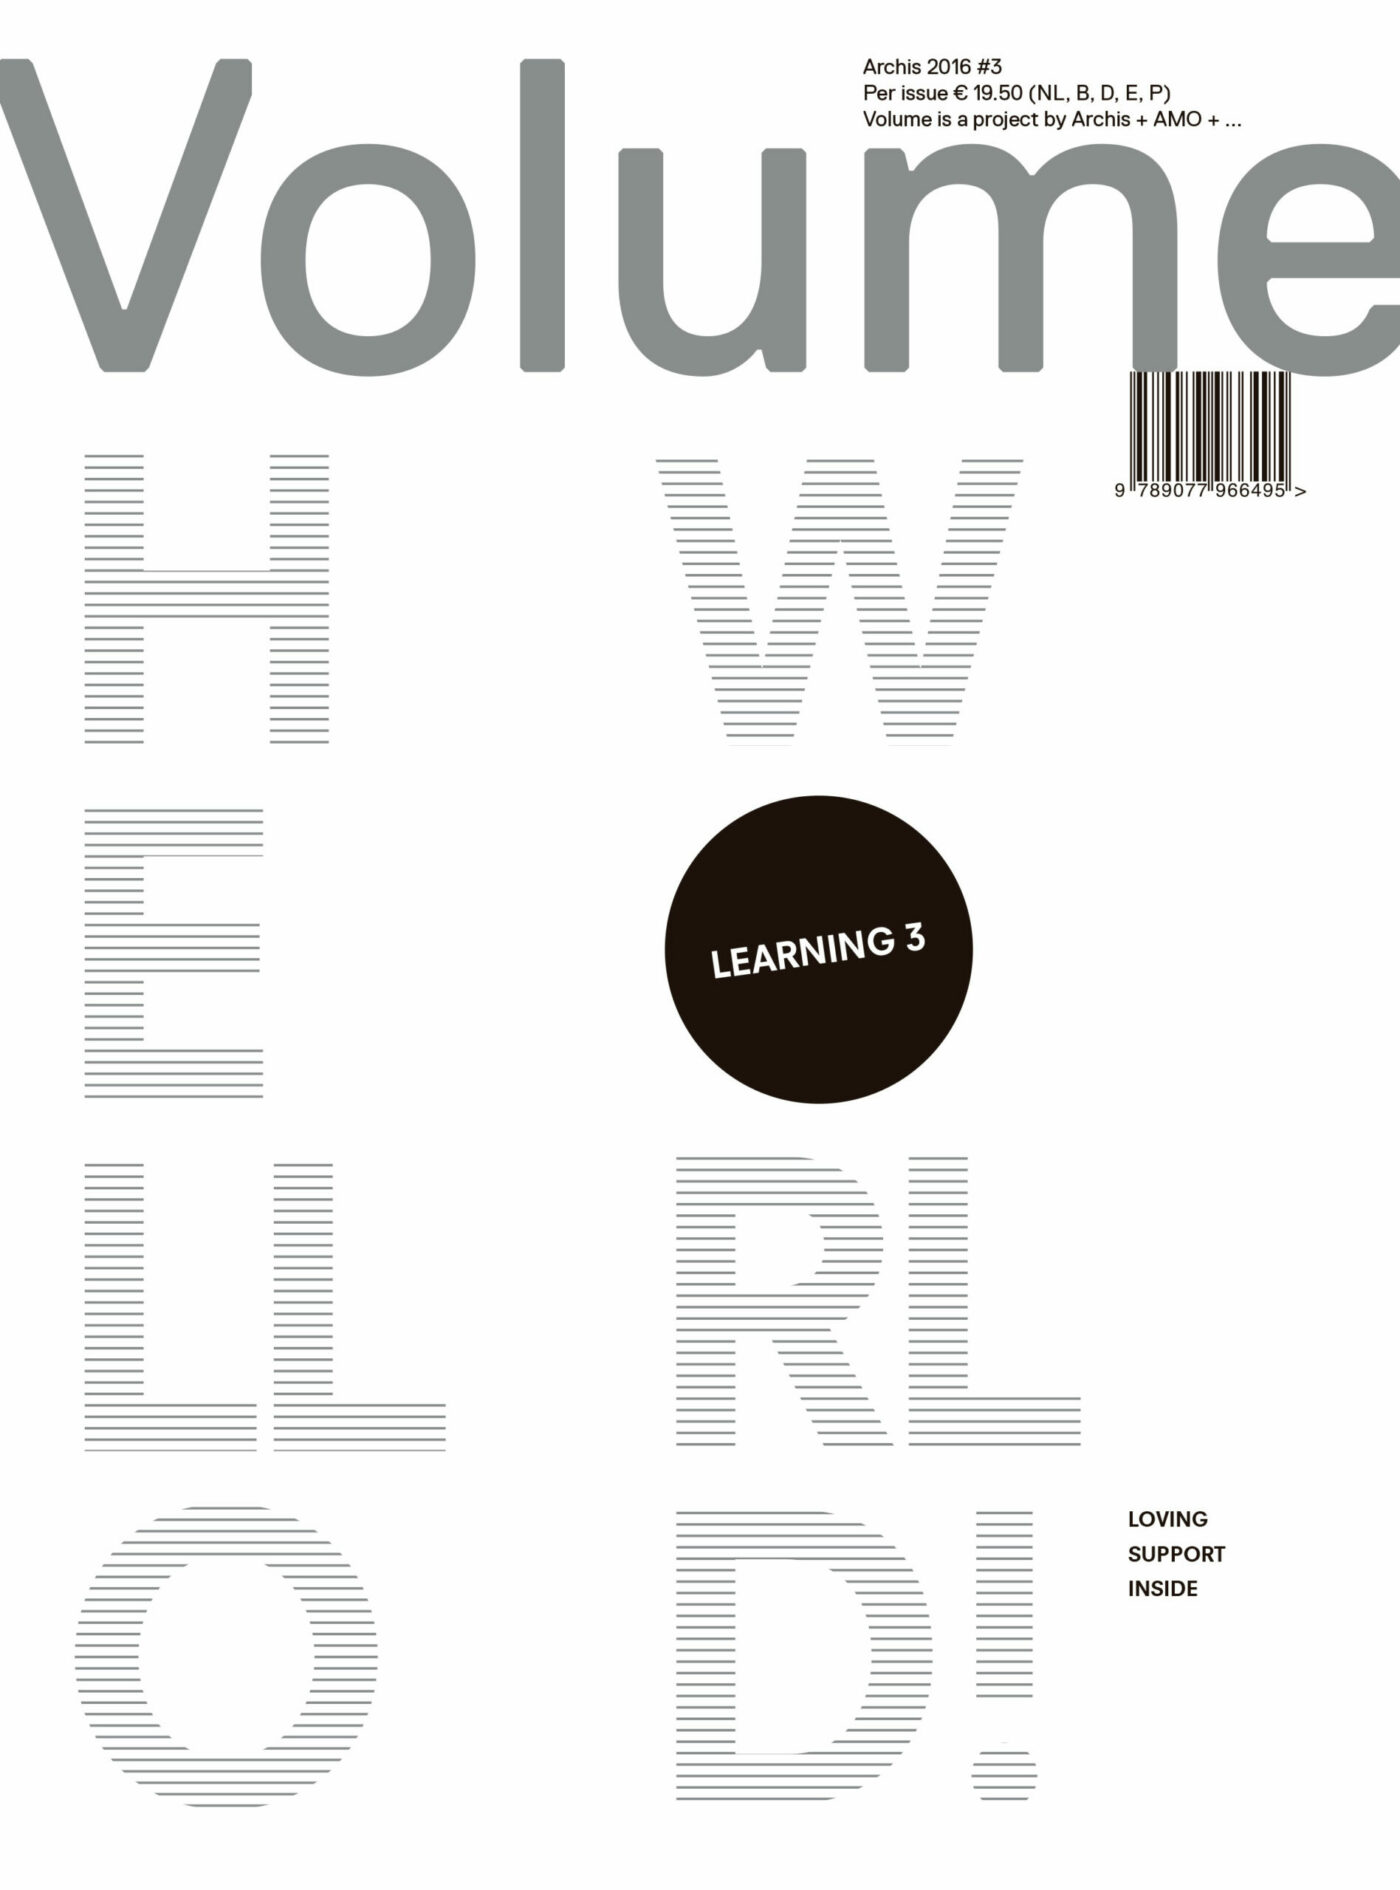 Out Now: Volume #49